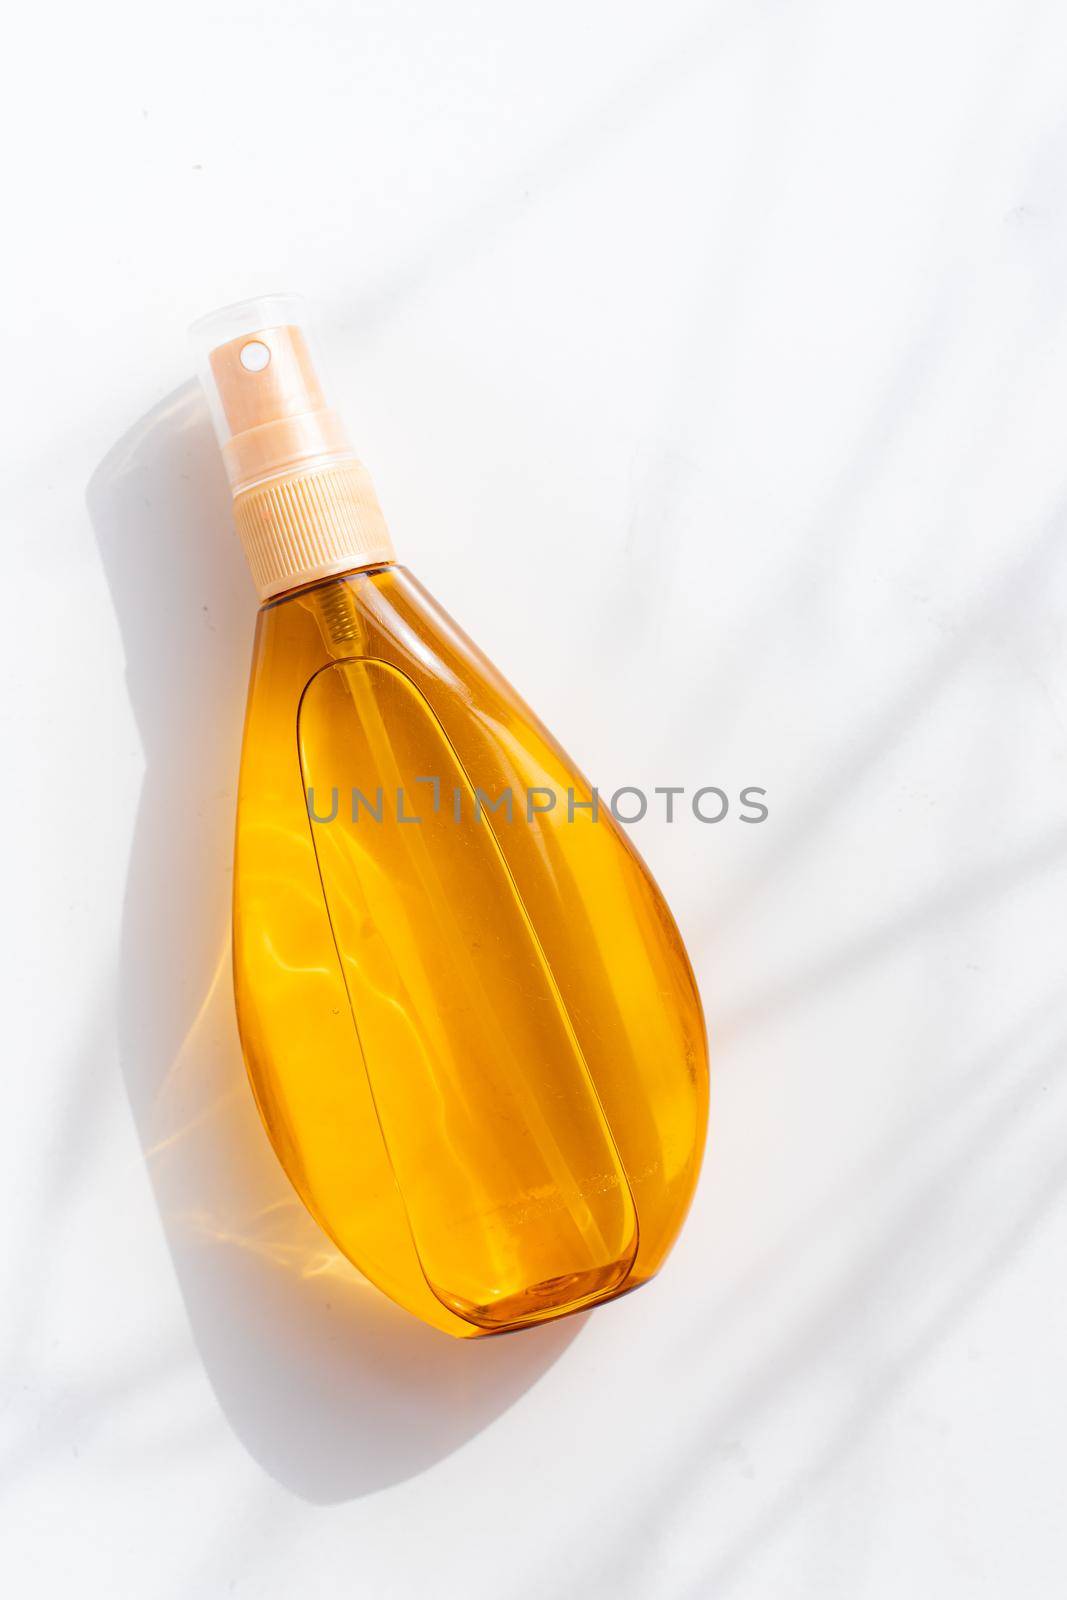 Suntan oil on a white background .Shadows and light. Protect your skin from the sun. A proper and even tan. Copy space